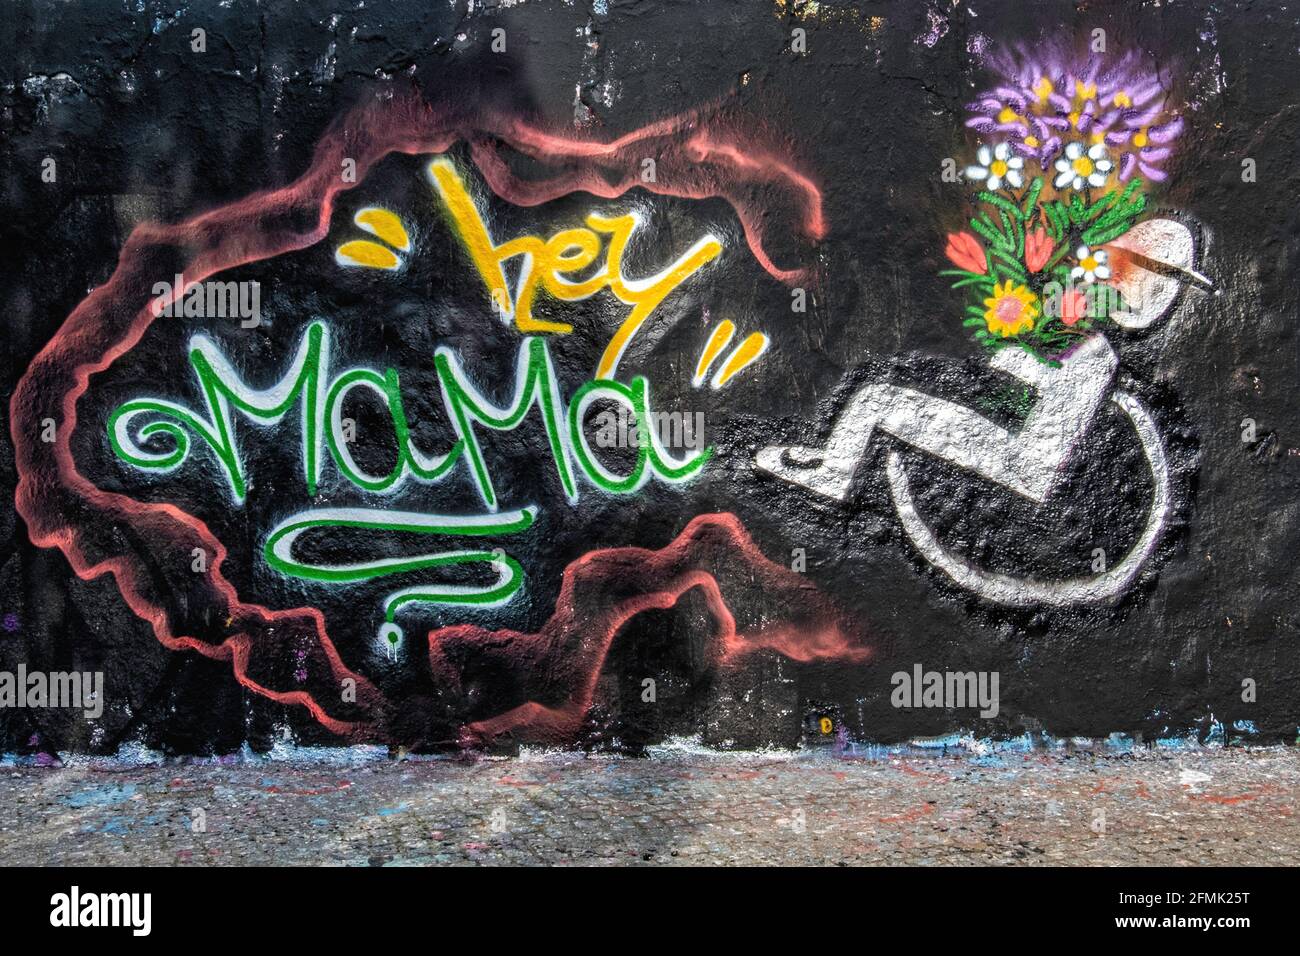 Street art on wall in Mauer Park, Prenzlauer Berg,Berlin, Street artist celebrates Mother's Day on 5th May 2021 Stock Photo